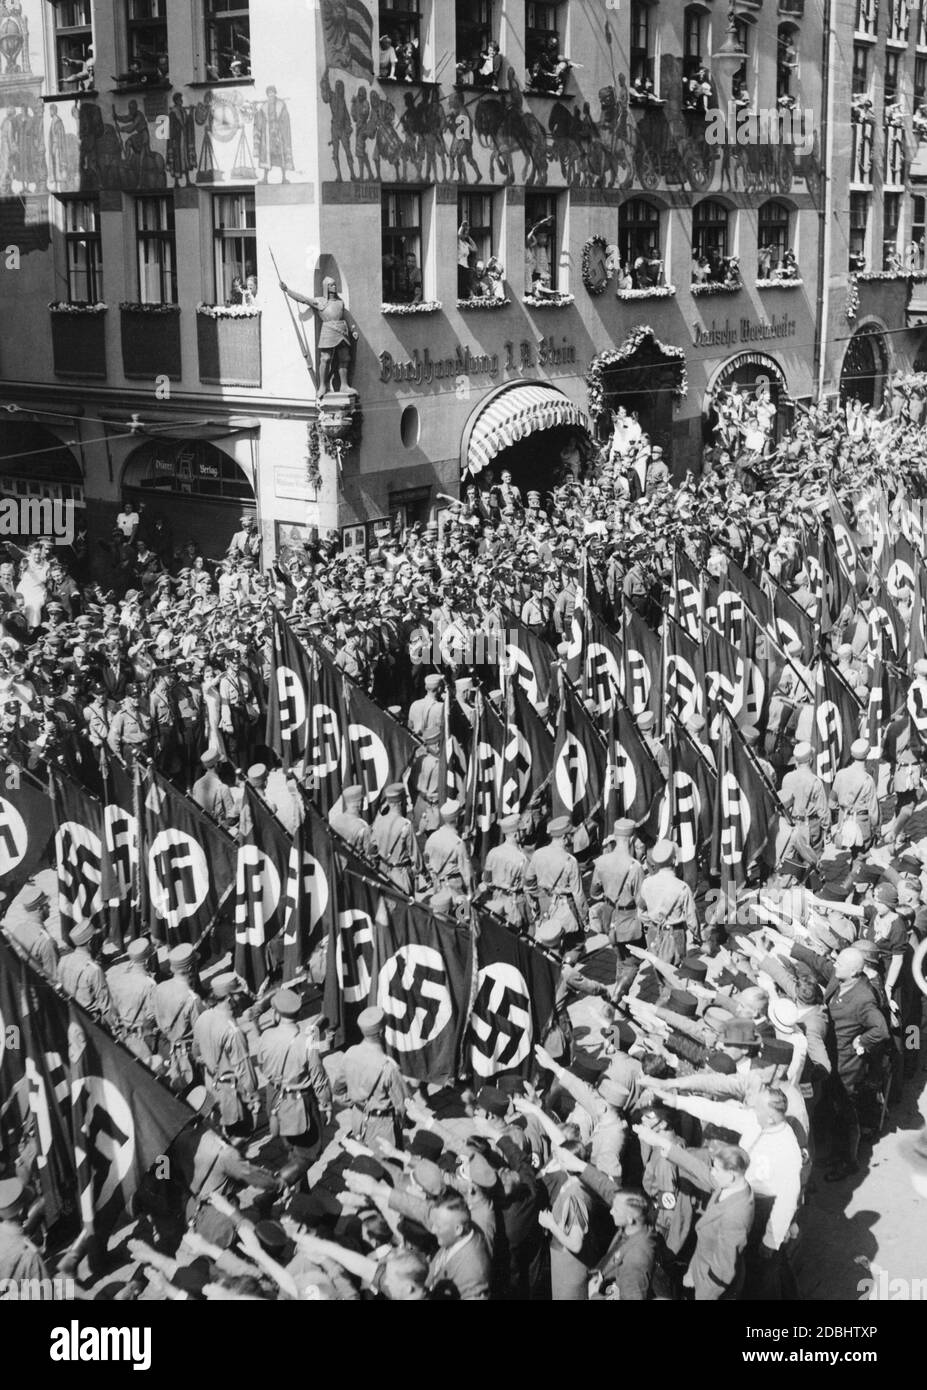 'View of the march past of the SA with swastika flags on the so-called Adolf-Hitler-Platz during the Nazi Party Congress in Nuremberg, as they are greeted by the crowd. In the background the bookstore ''Buchhandlung J.A. Stein - Deutsche Wertarbeit'', on the facade of which are paintings and a swastika.' Stock Photo